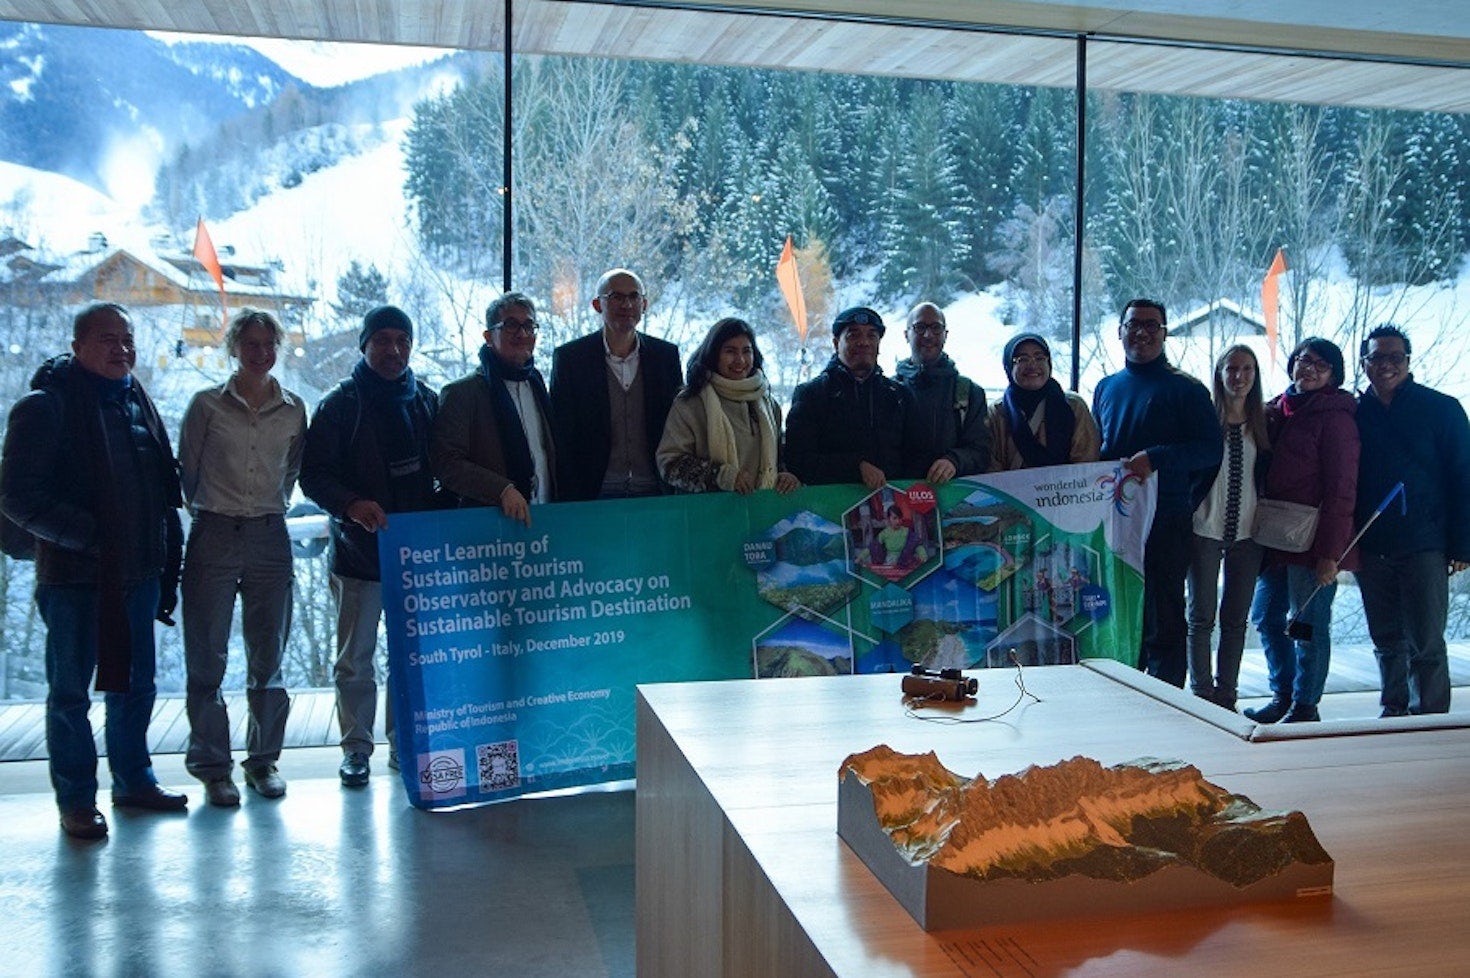 Observatories for sustainable tourism meet for exchange. Indonesian delegation visits South Tyrol.